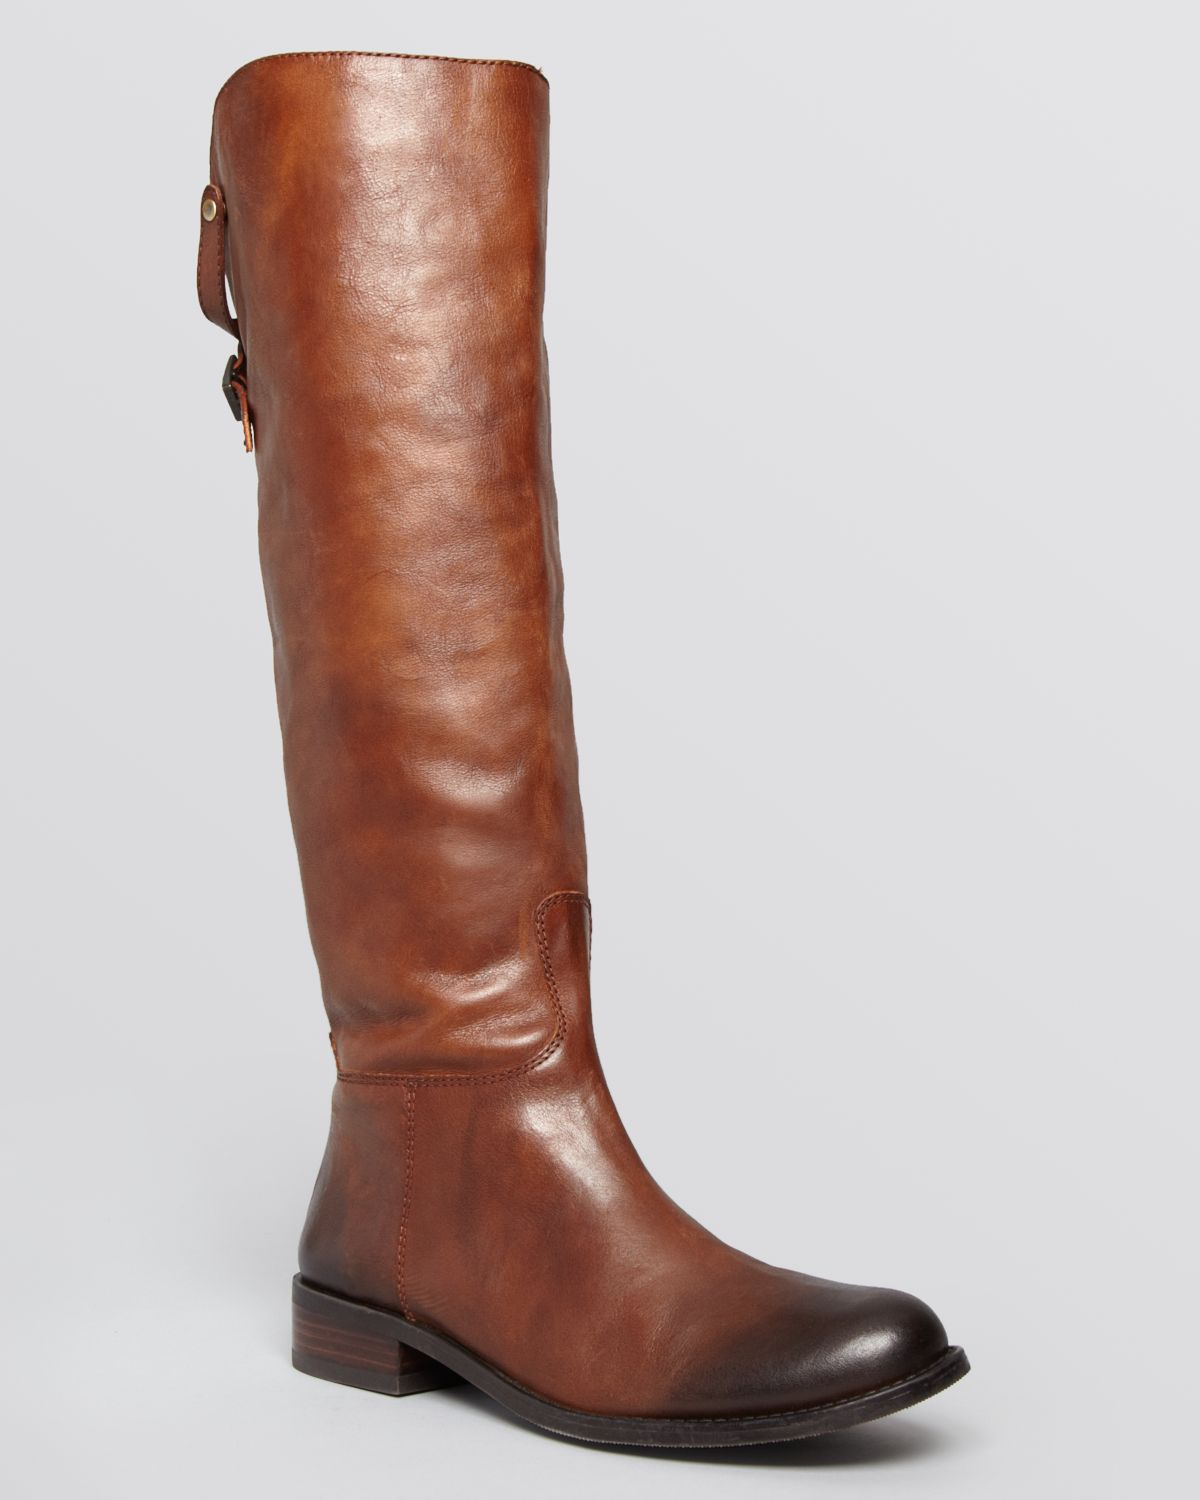 Lyst - Vince Camuto Tall Riding Boots - Kadia Back Buckle in Brown1200 x 1500